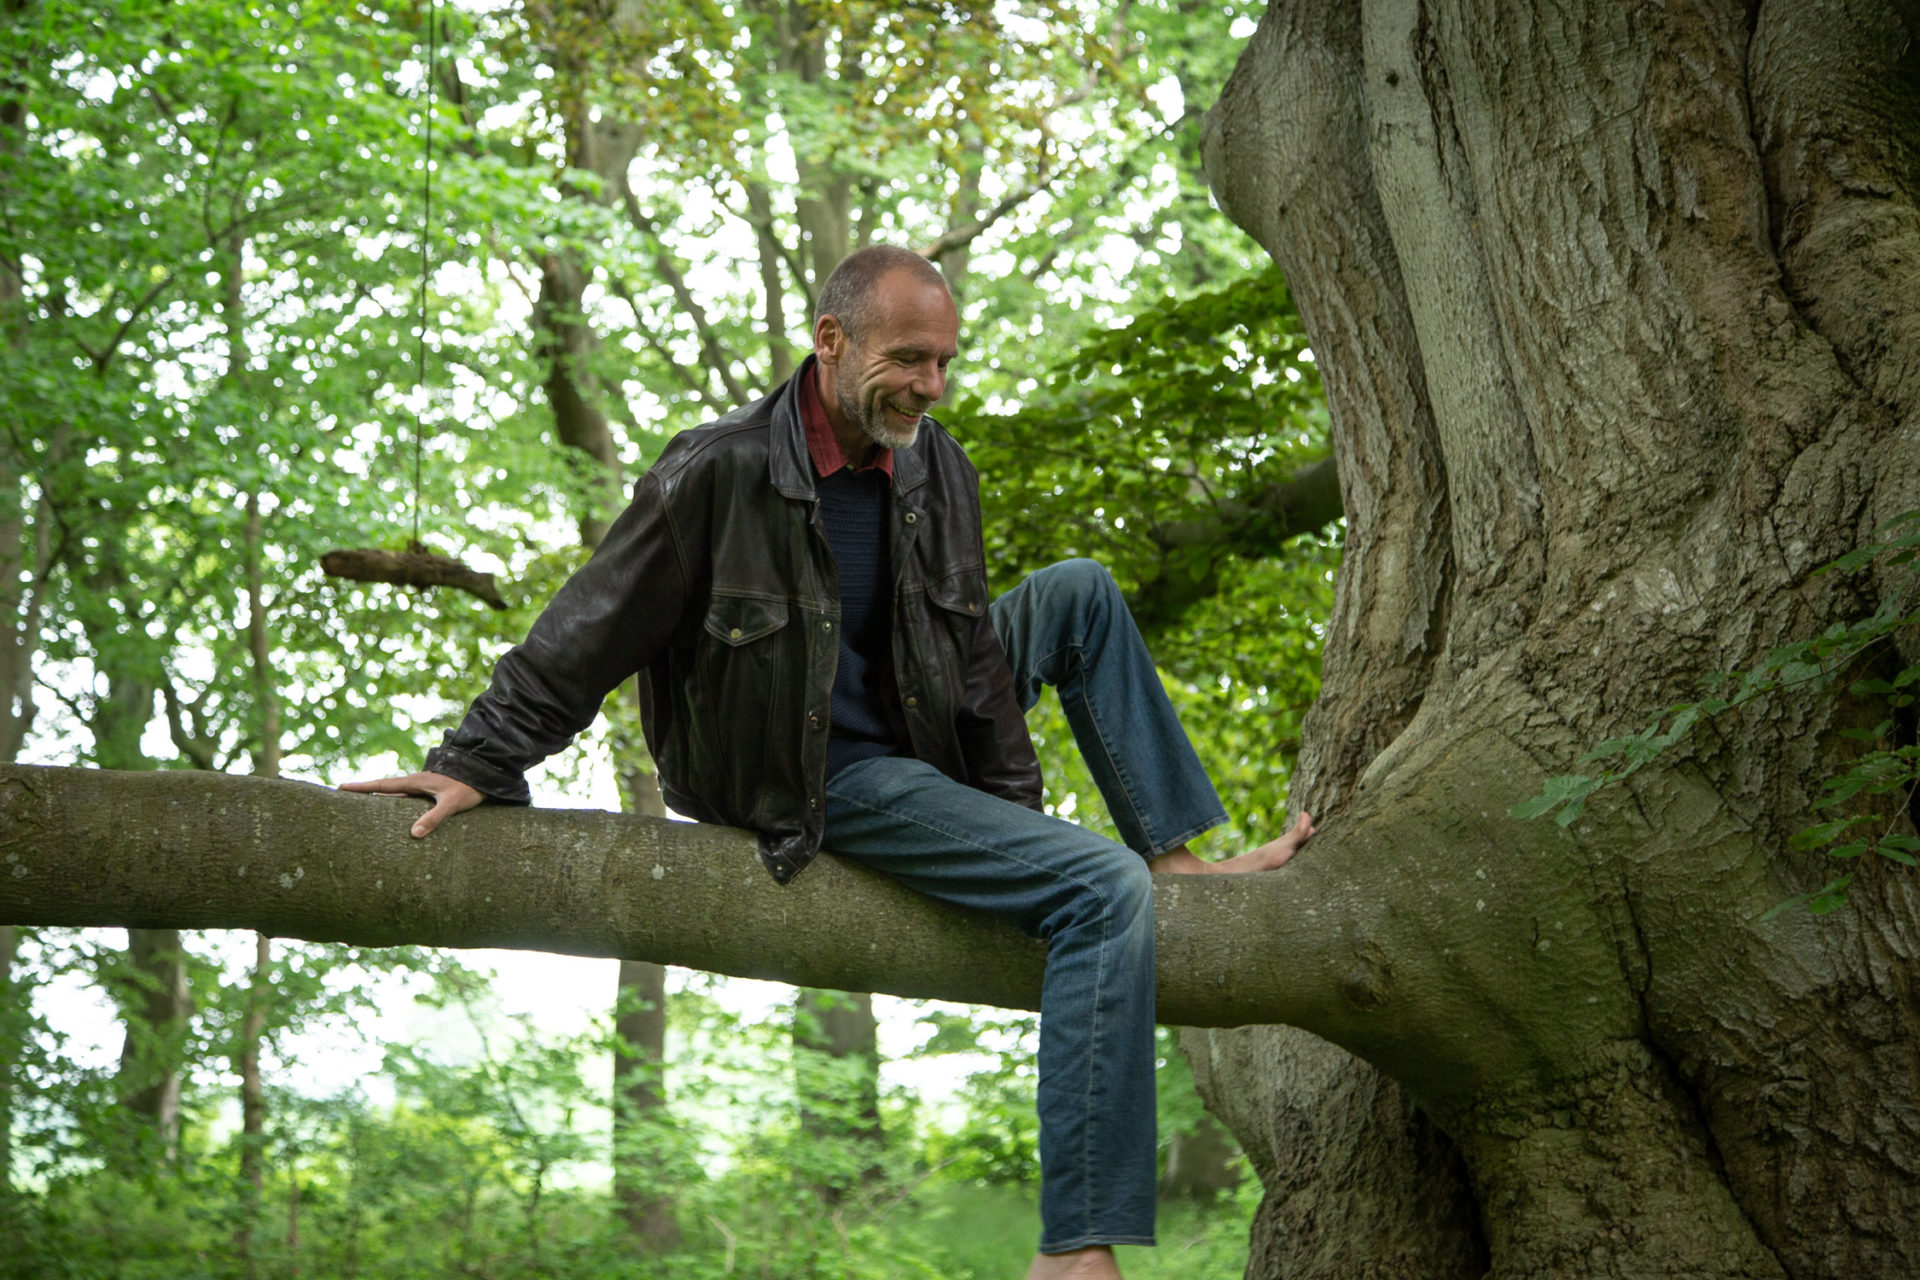 Stephan smiling in a tree, encouraging you to face your fears